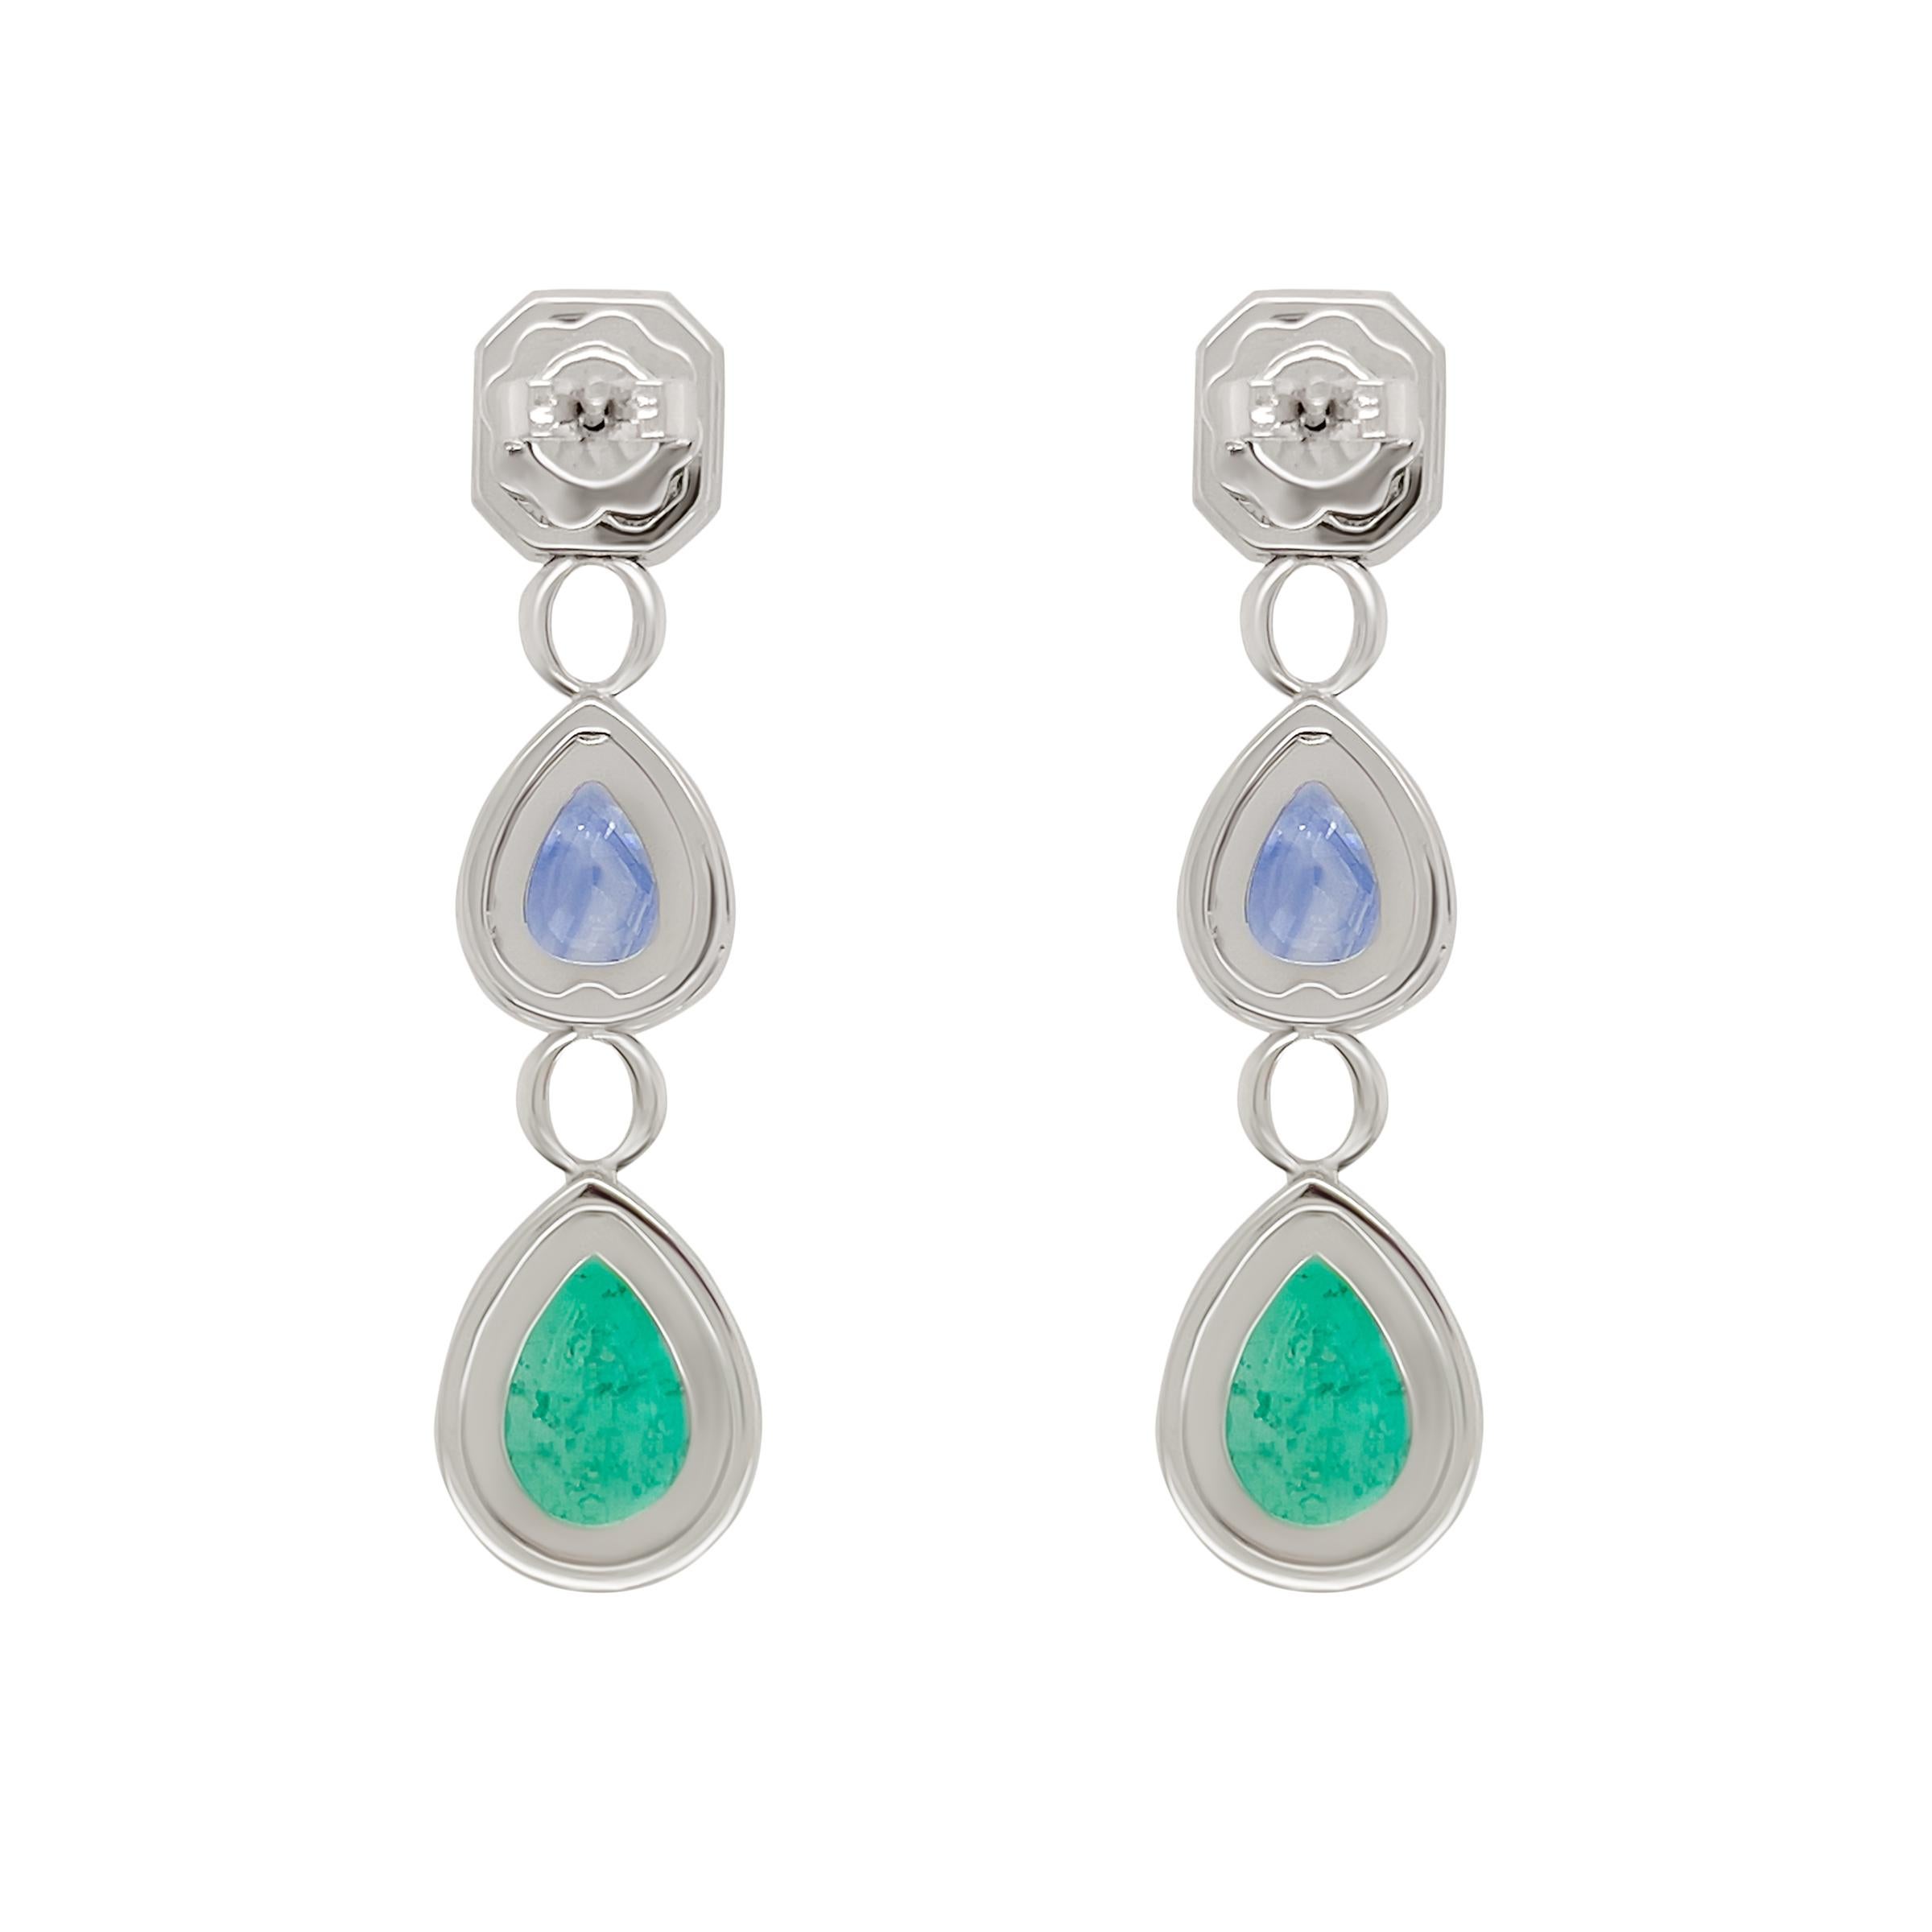 This pair of 18k white gold earrings are classic in design showcasing bright and colourful  natural (no heat ) emeralds and blue sapphires. The emeralds totaling 5.4 carats and 3.93 carats of blue sapphire are surrounded by pave’d white diamonds.